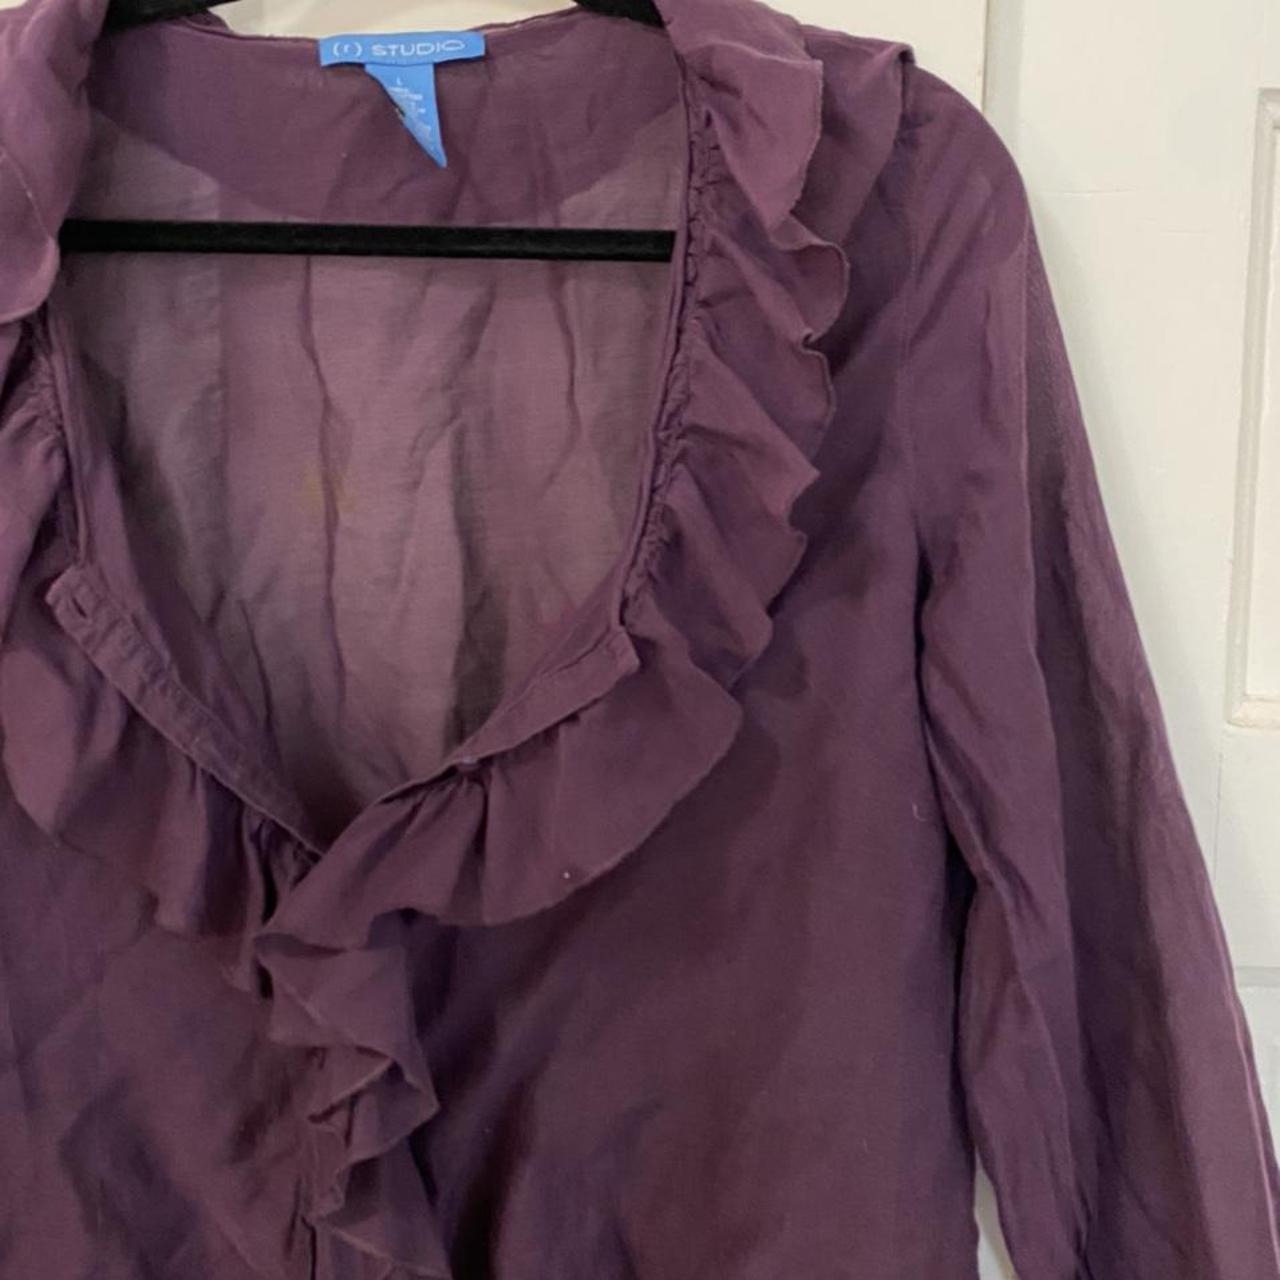 Product Image 2 - gorgeous sheer purple top! gives